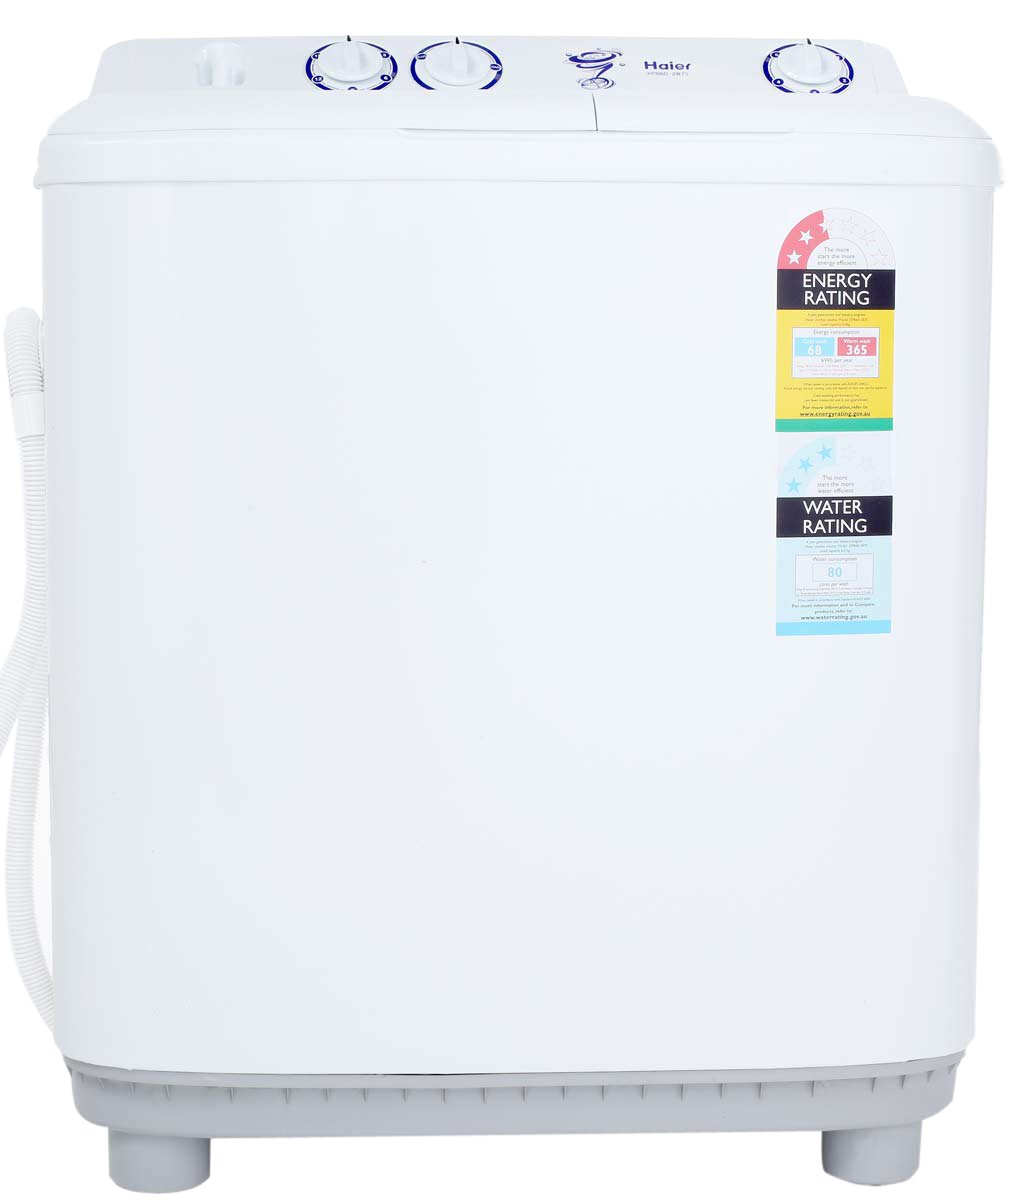 Details About New Haier Xpb60 287s 6kg Top Load Twin Tub Washing Machine